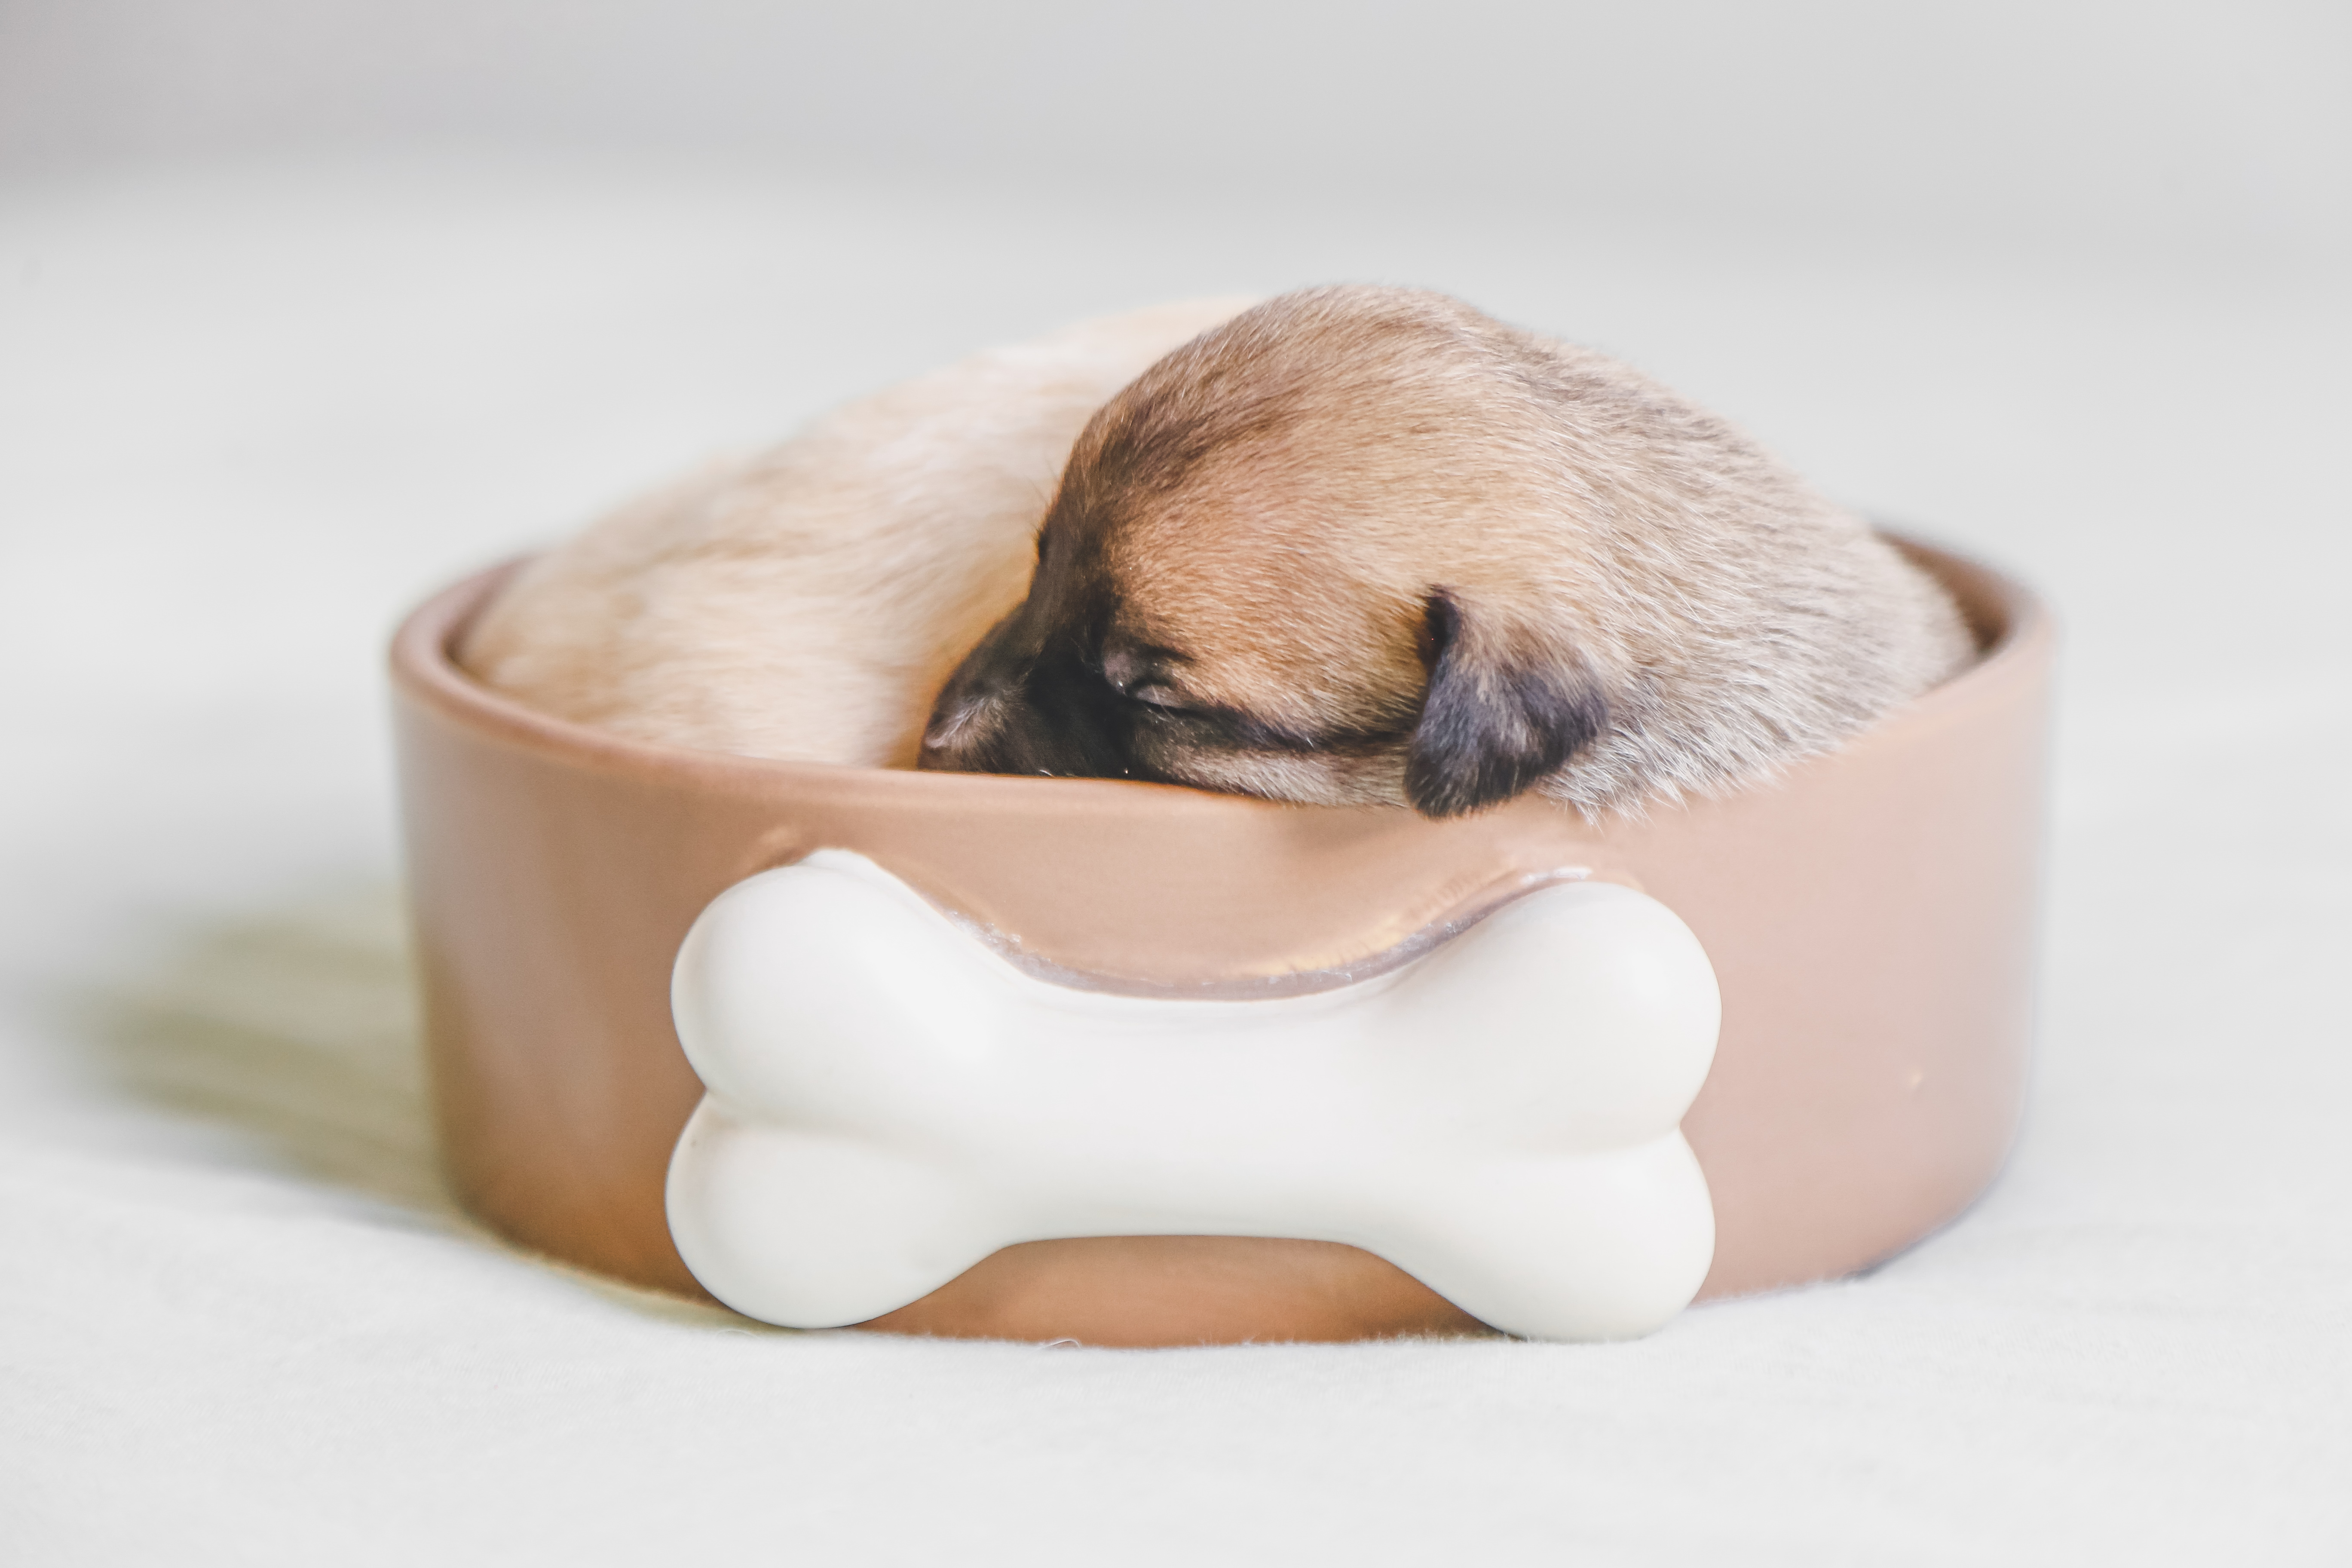 Puppy sleeping in a pet bowl